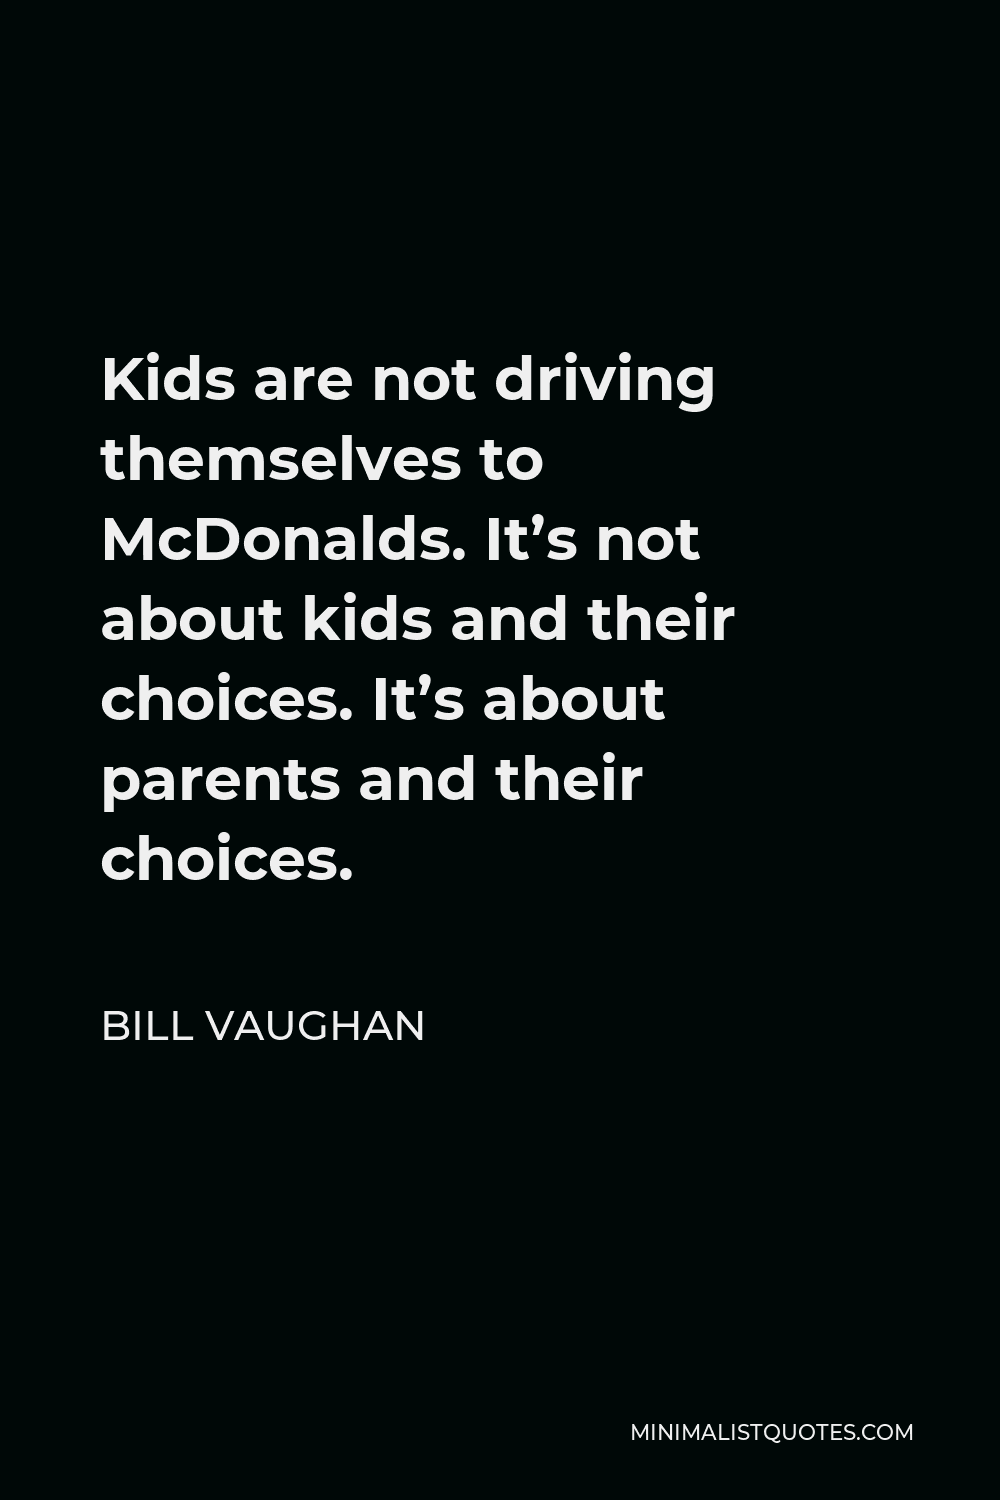 Bill Vaughan Quote - Kids are not driving themselves to McDonalds. It’s not about kids and their choices. It’s about parents and their choices.